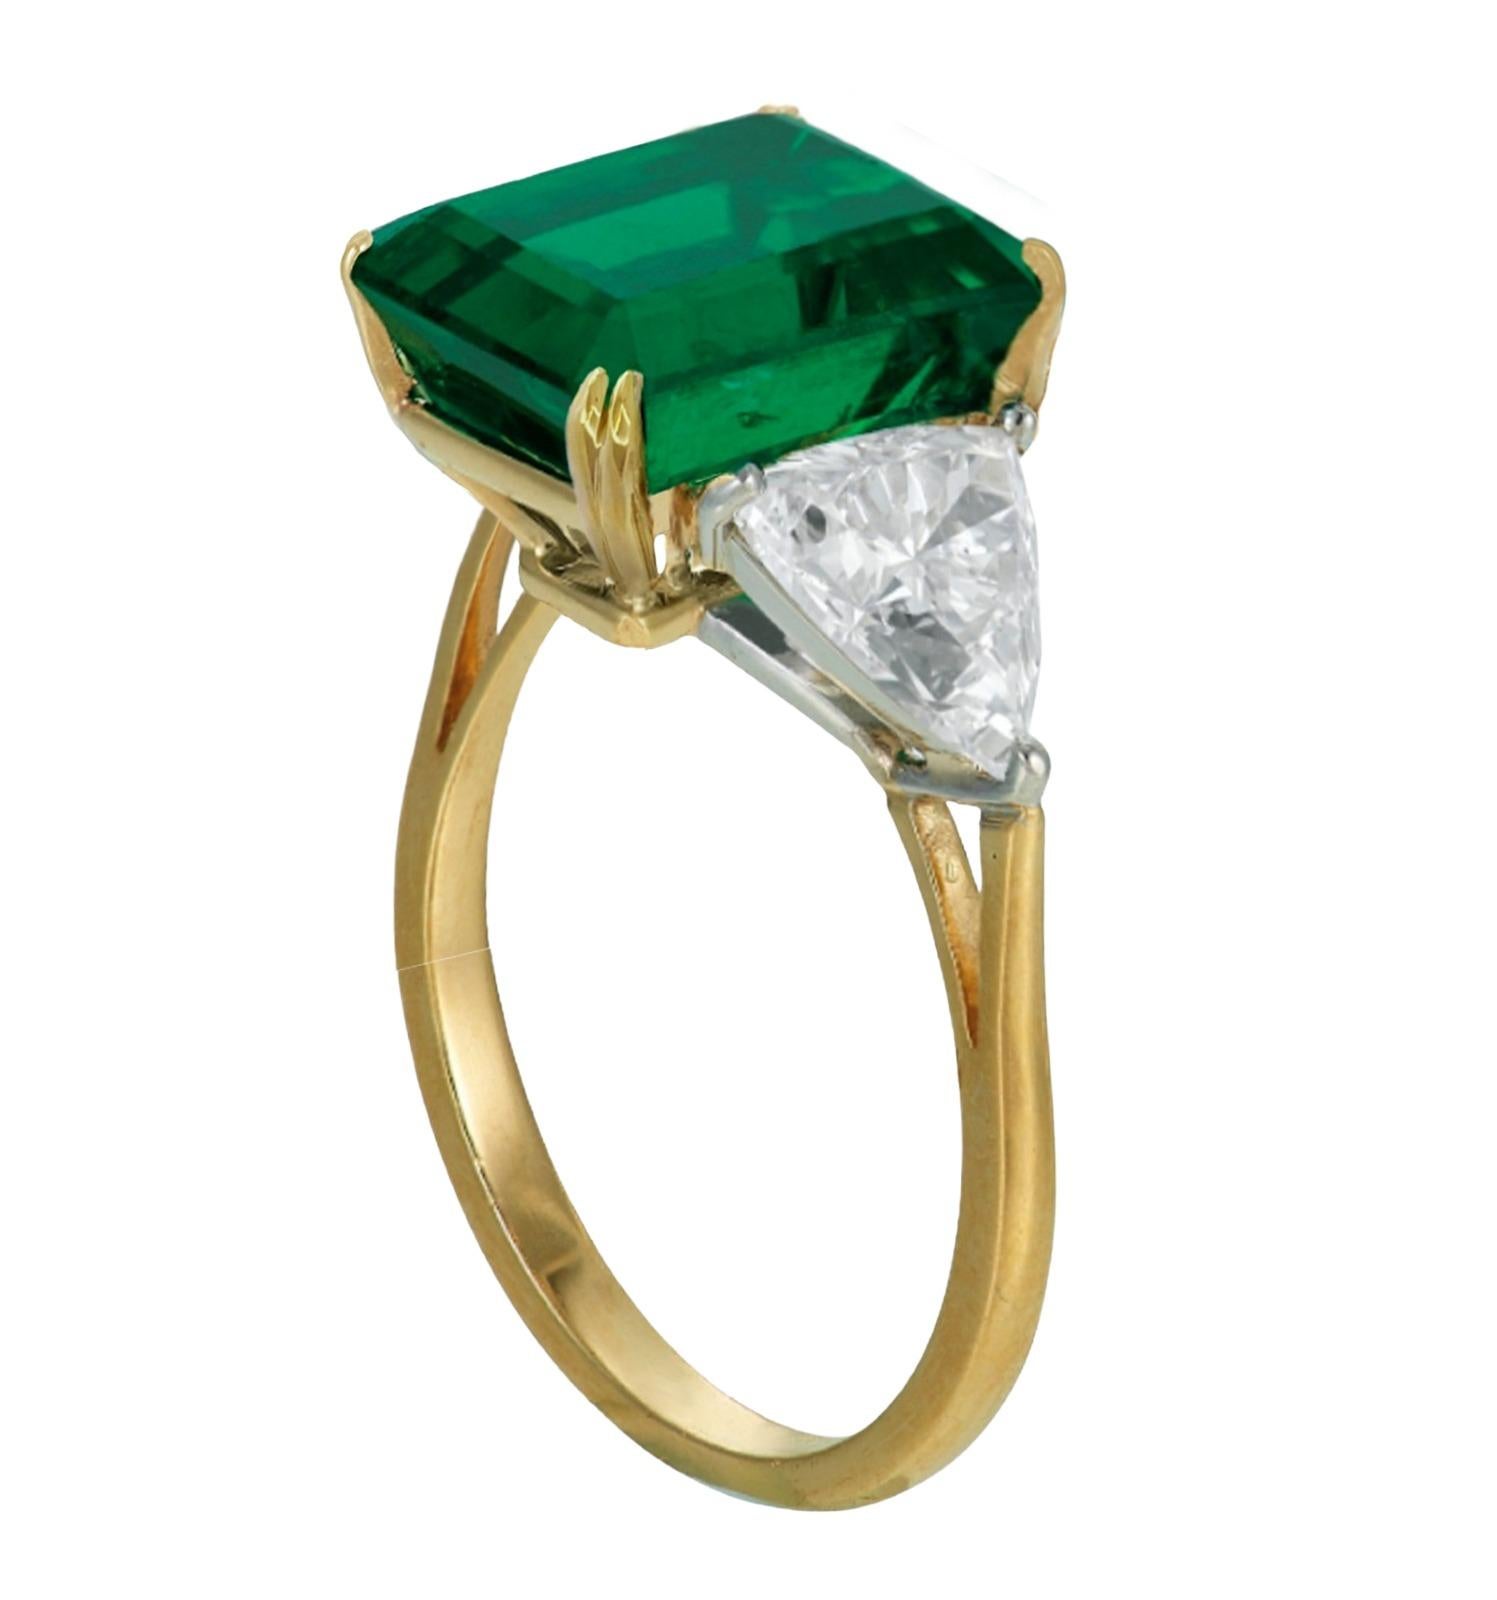 ICA Certified 5.49 Carat Minor Oil Green Emerald Diamond Ring, set in exquisite 18K yellow gold.

This magnificent ring is a celebration of opulence and refinement, featuring a stunning 5.49 carat emerald-cut emerald, certified by ICA. Its